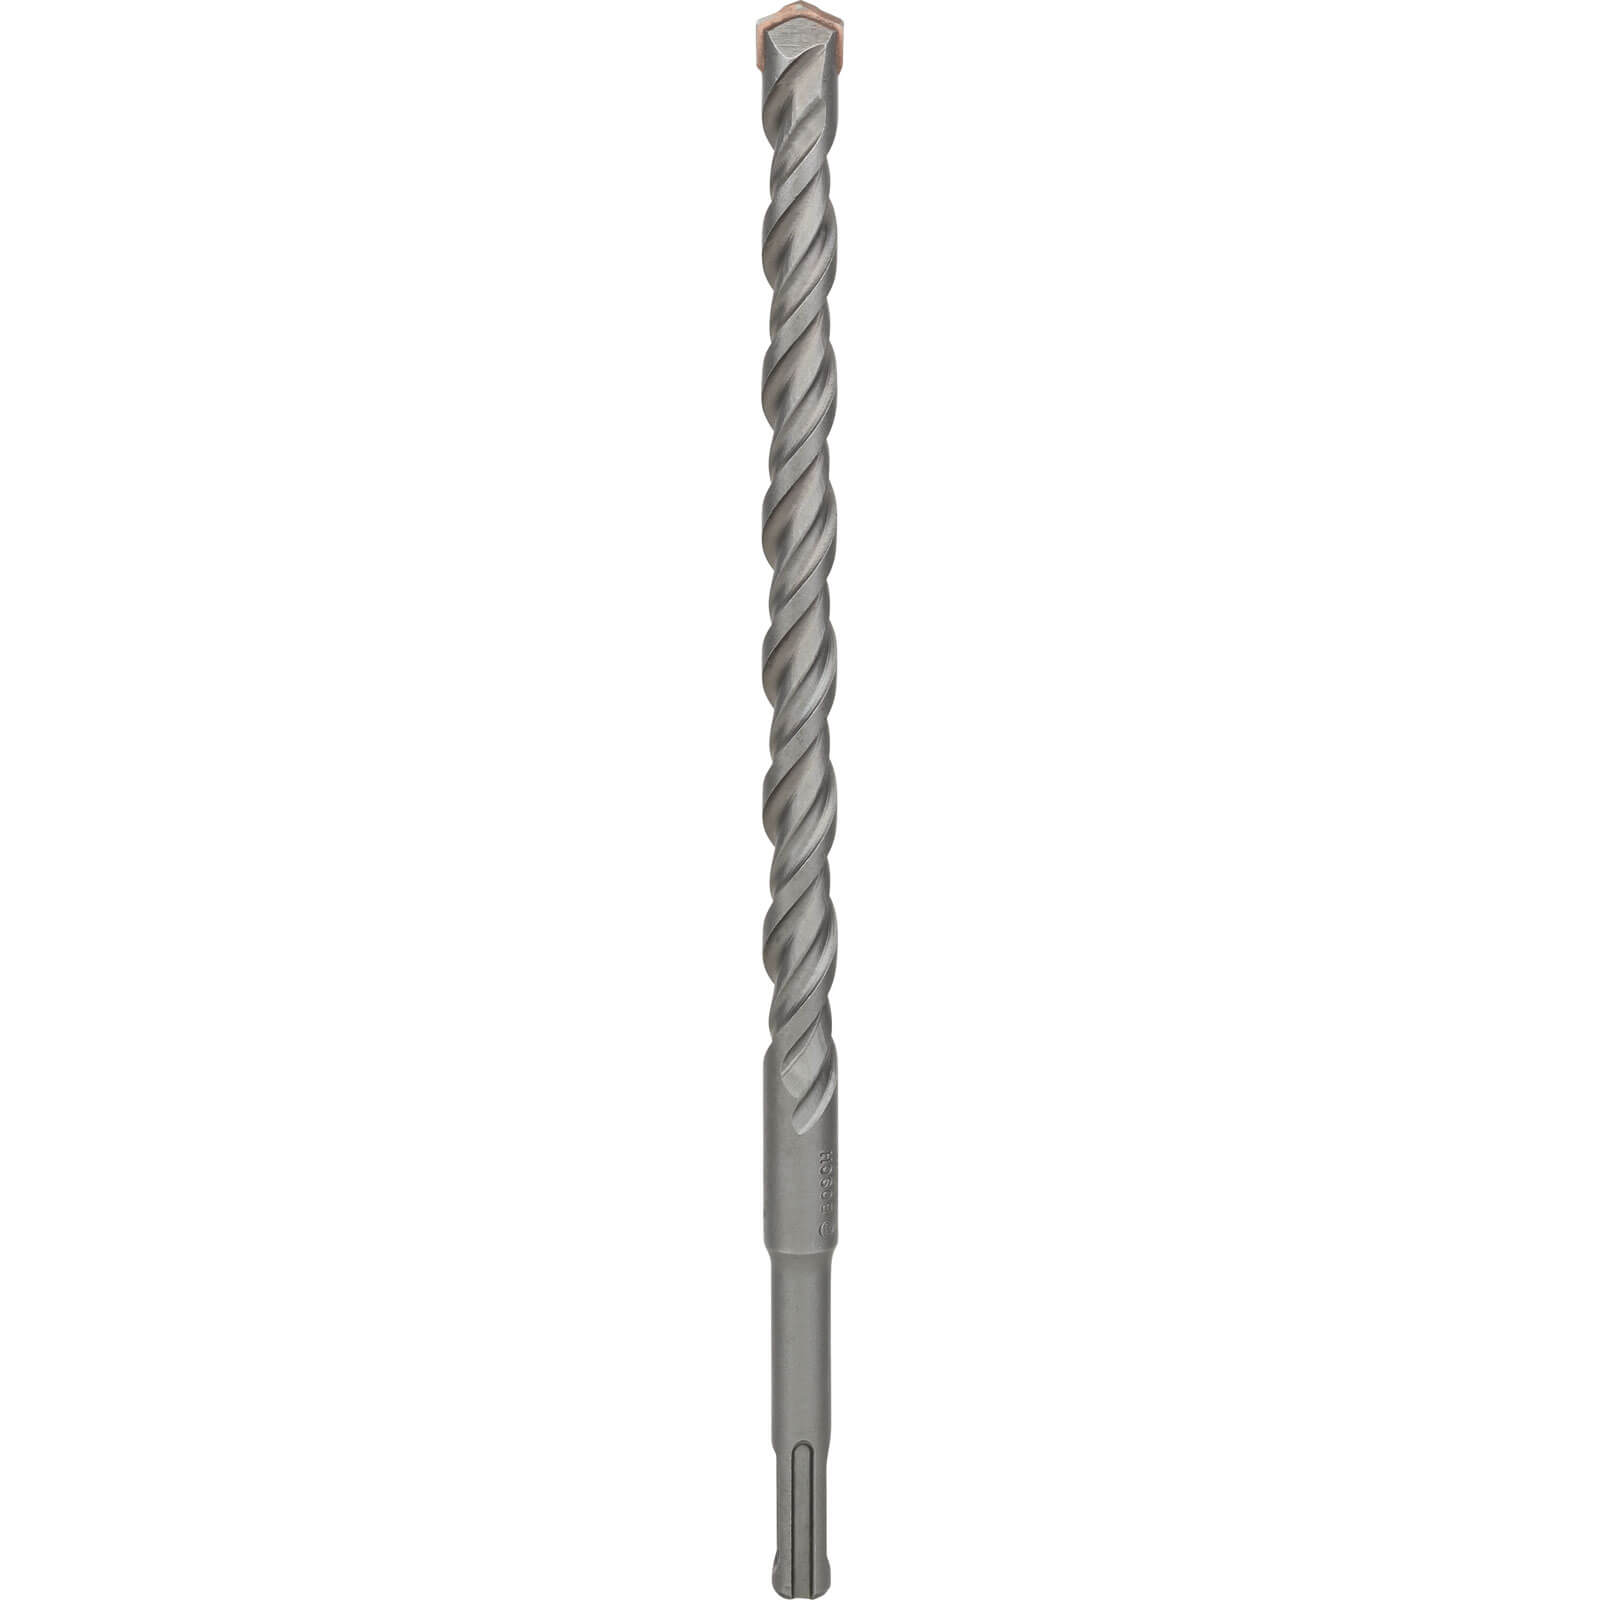 Image of Bosch Series 3 SDS Plus Masonry Drill Bit 14mm 260mm Pack of 1